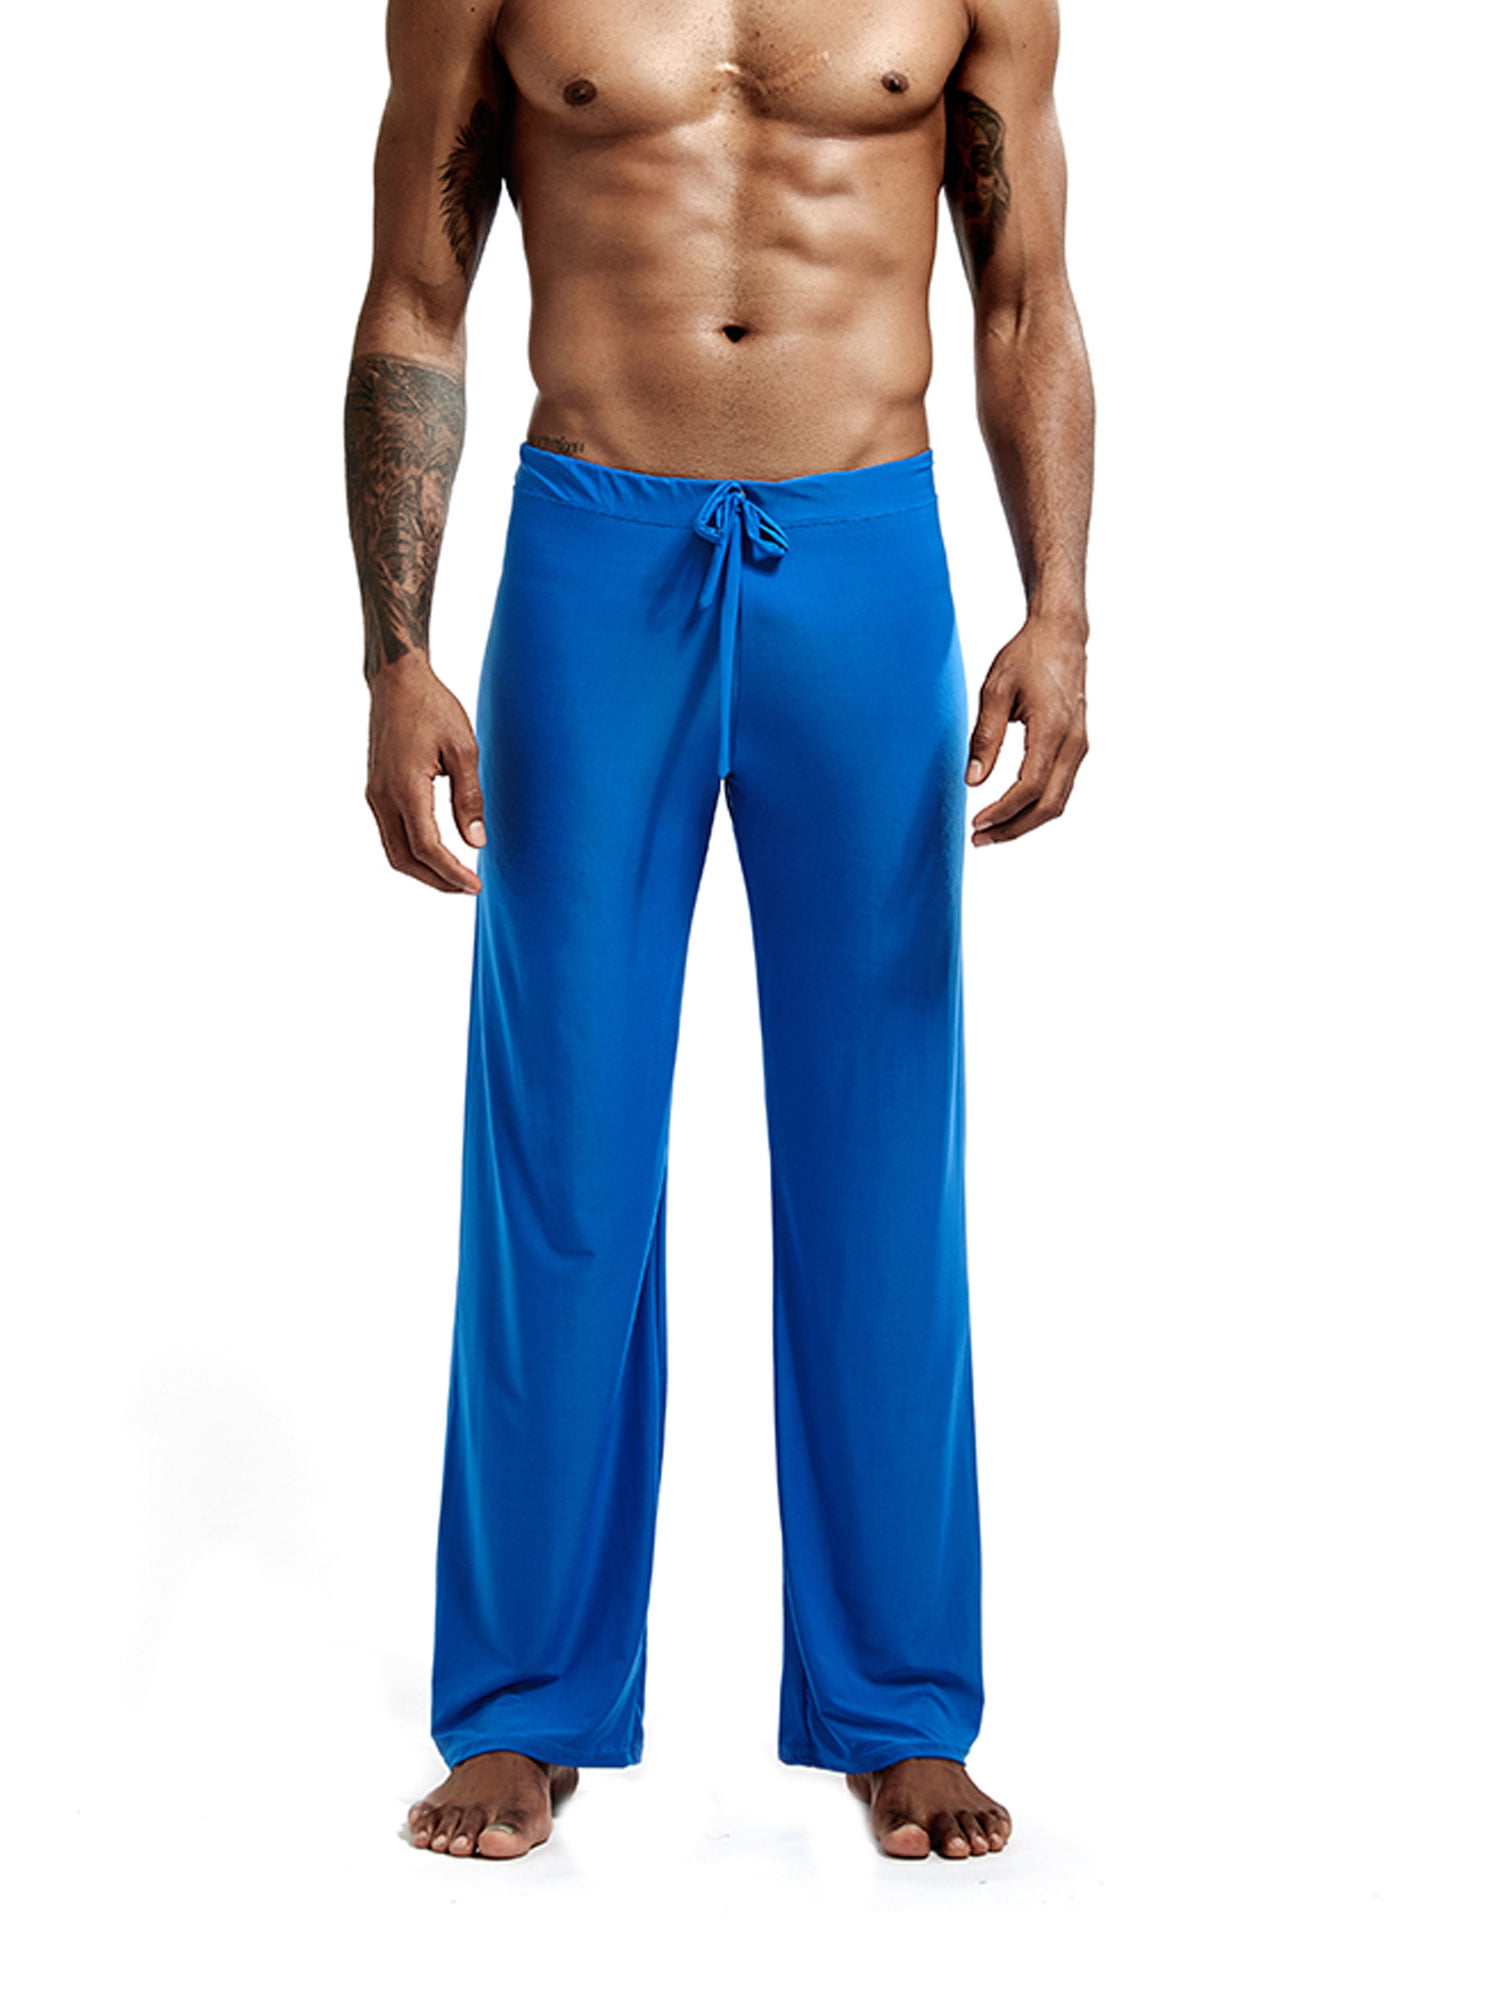 great fitting yoga pants for men